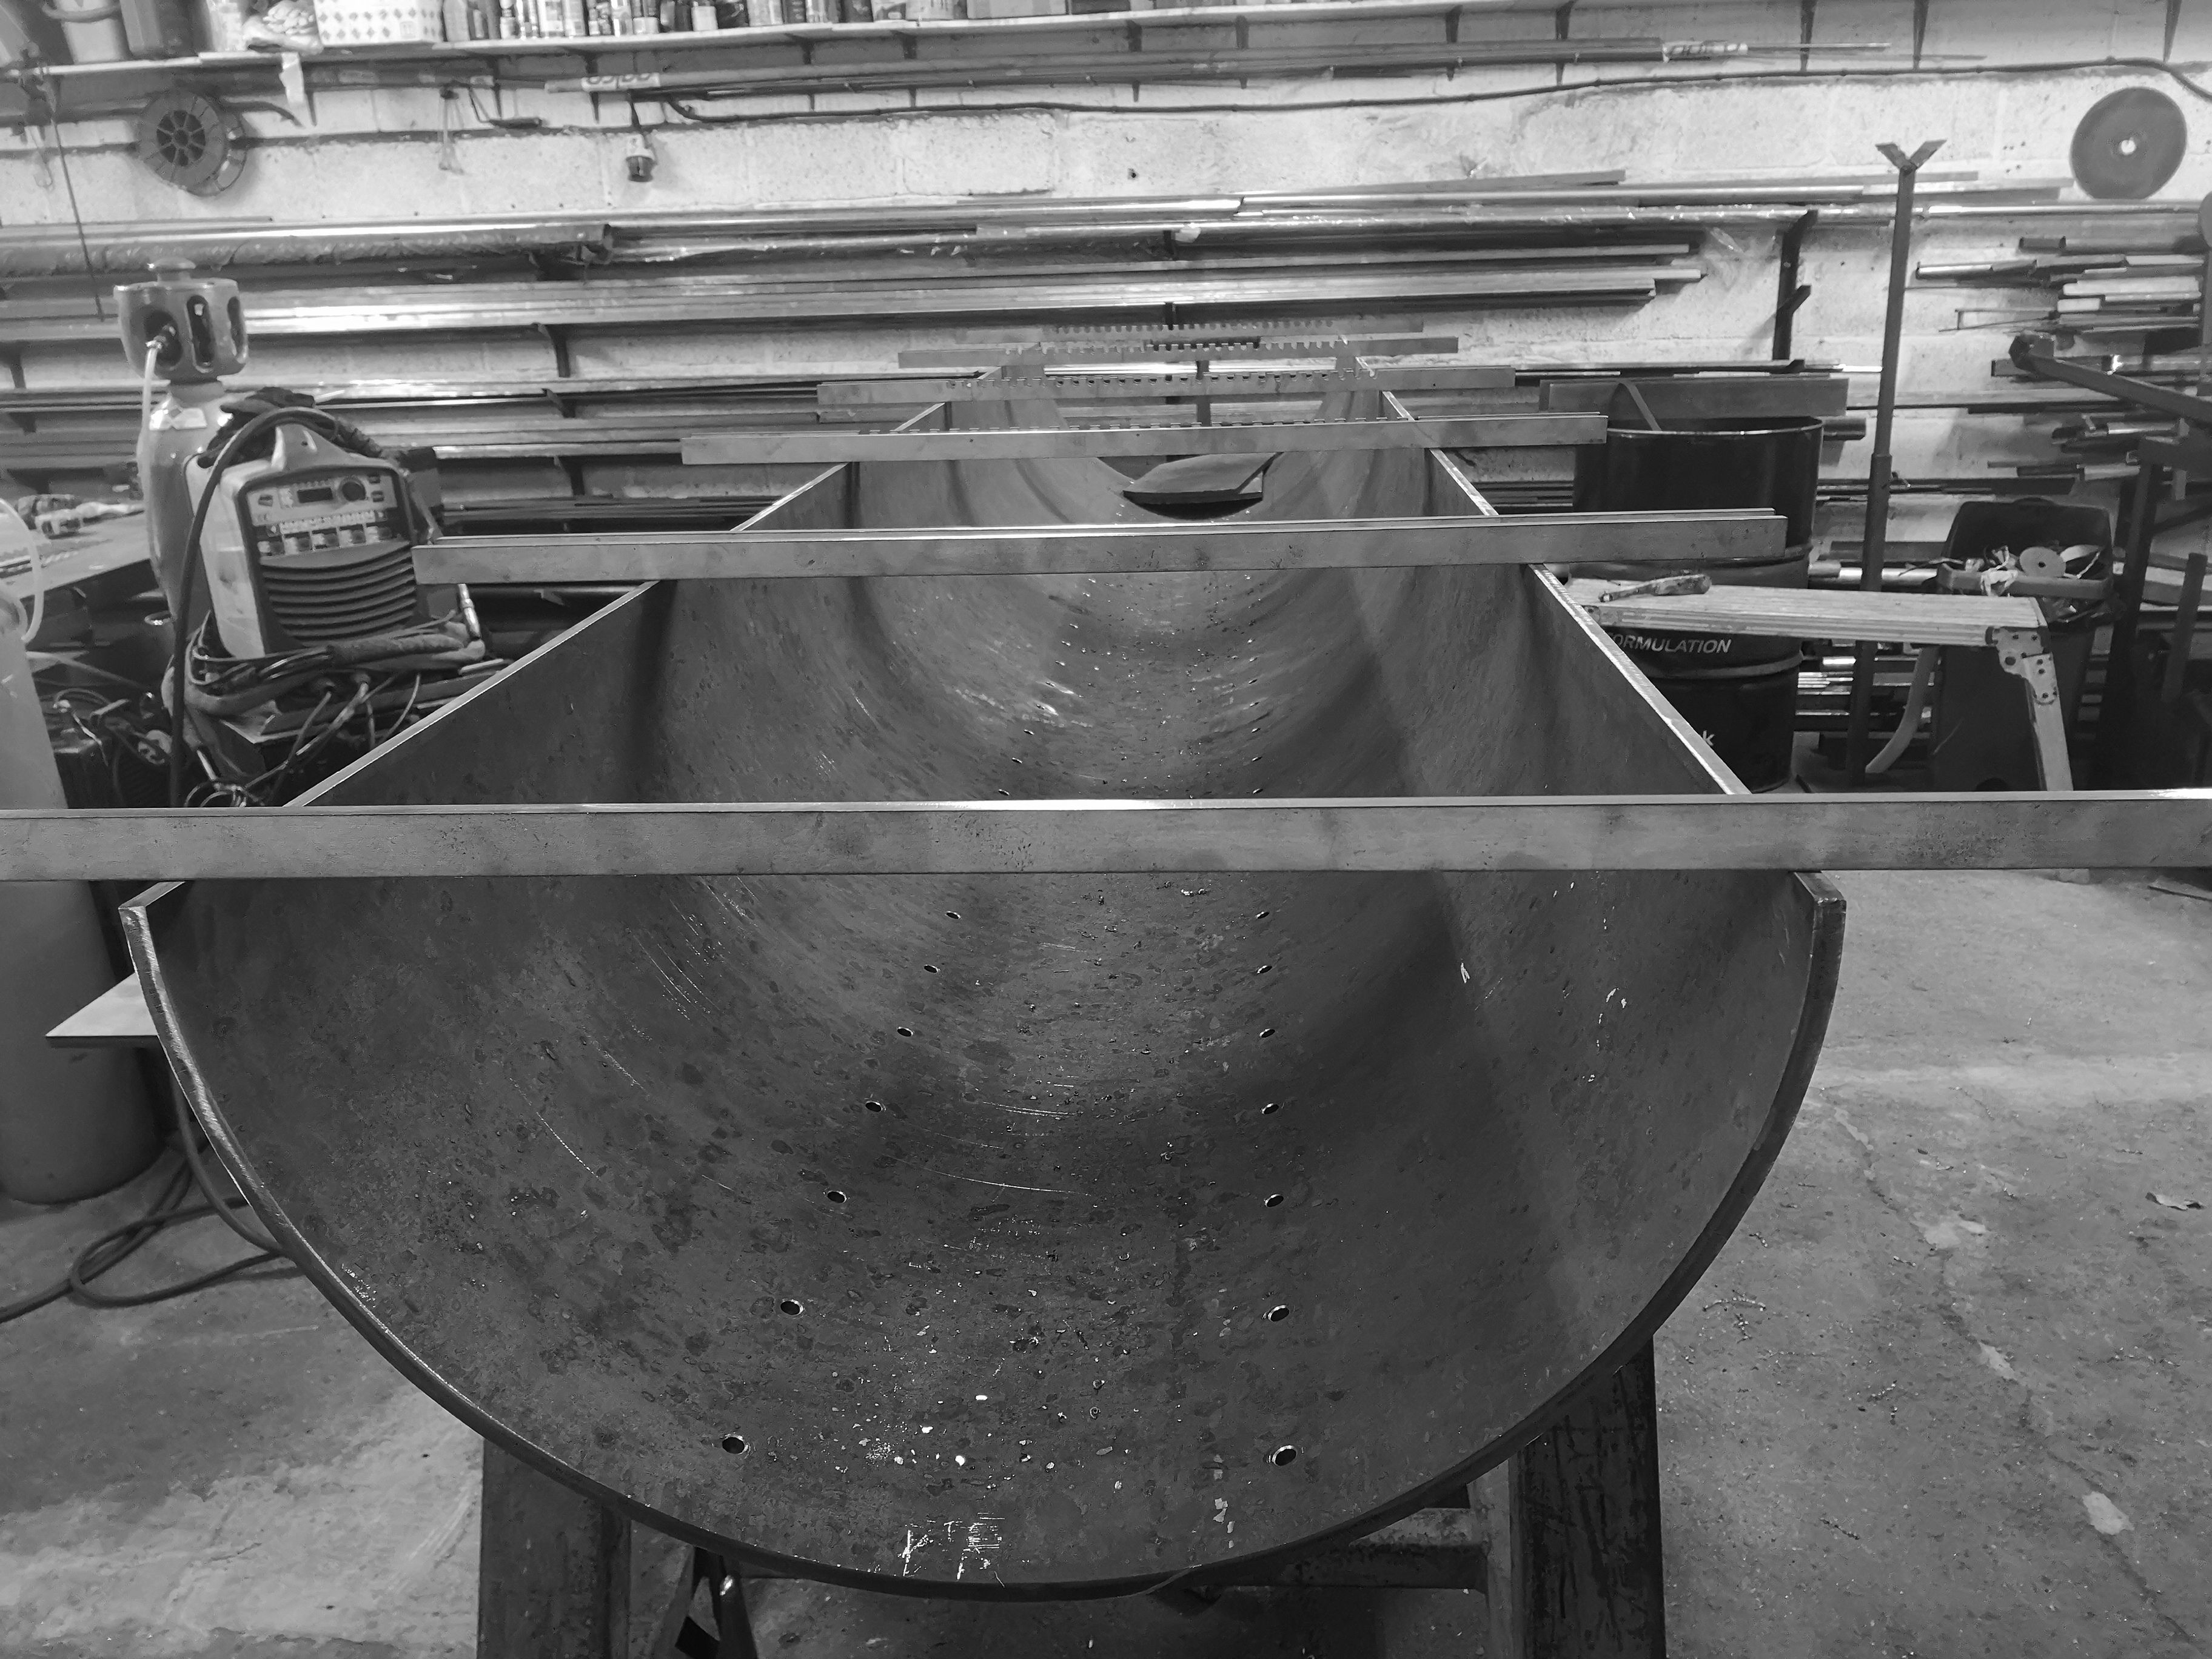 Black and white image of a firepit being constructed in a fabrication workshop.